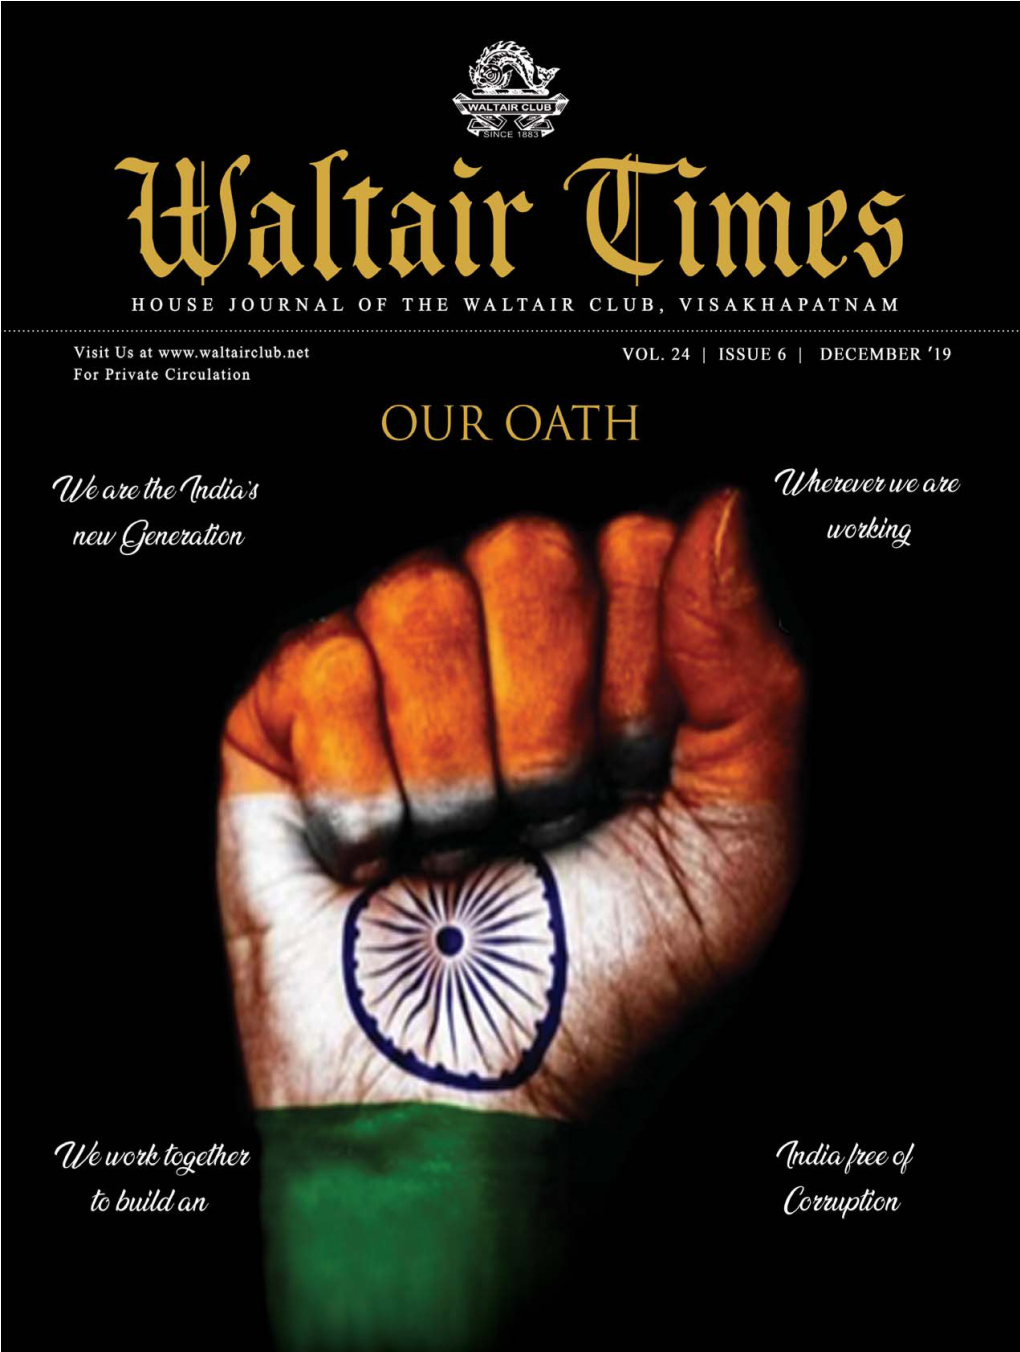 Waltair Times 1 Waltair Times 2 CONTENTS